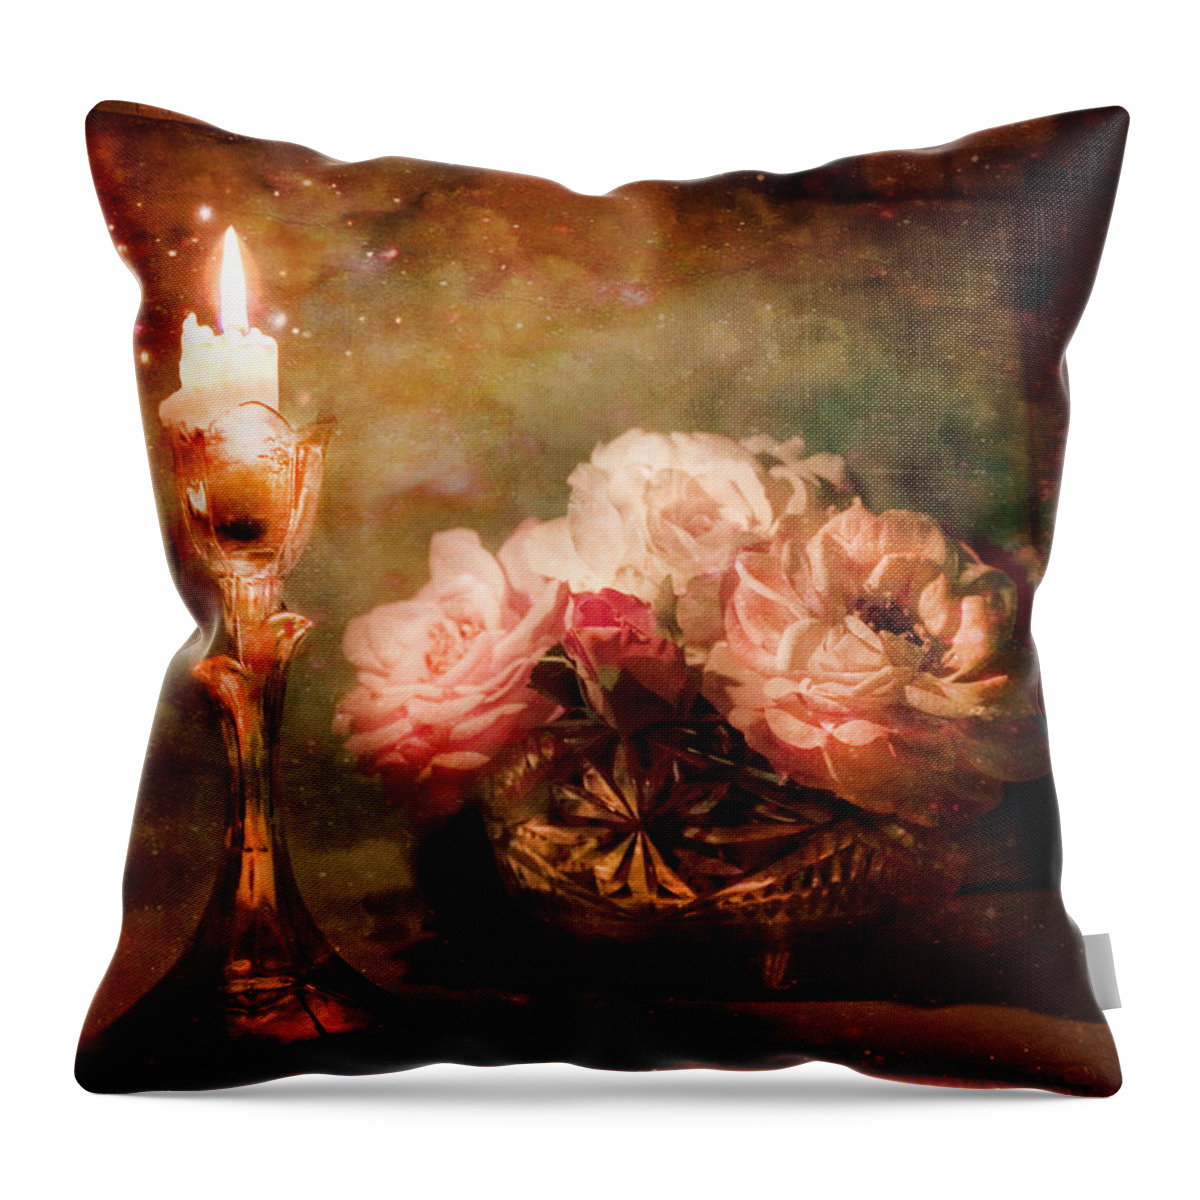 Vintage Still Life Throw Pillow featuring the photograph Roses By Candlelight by Theresa Tahara